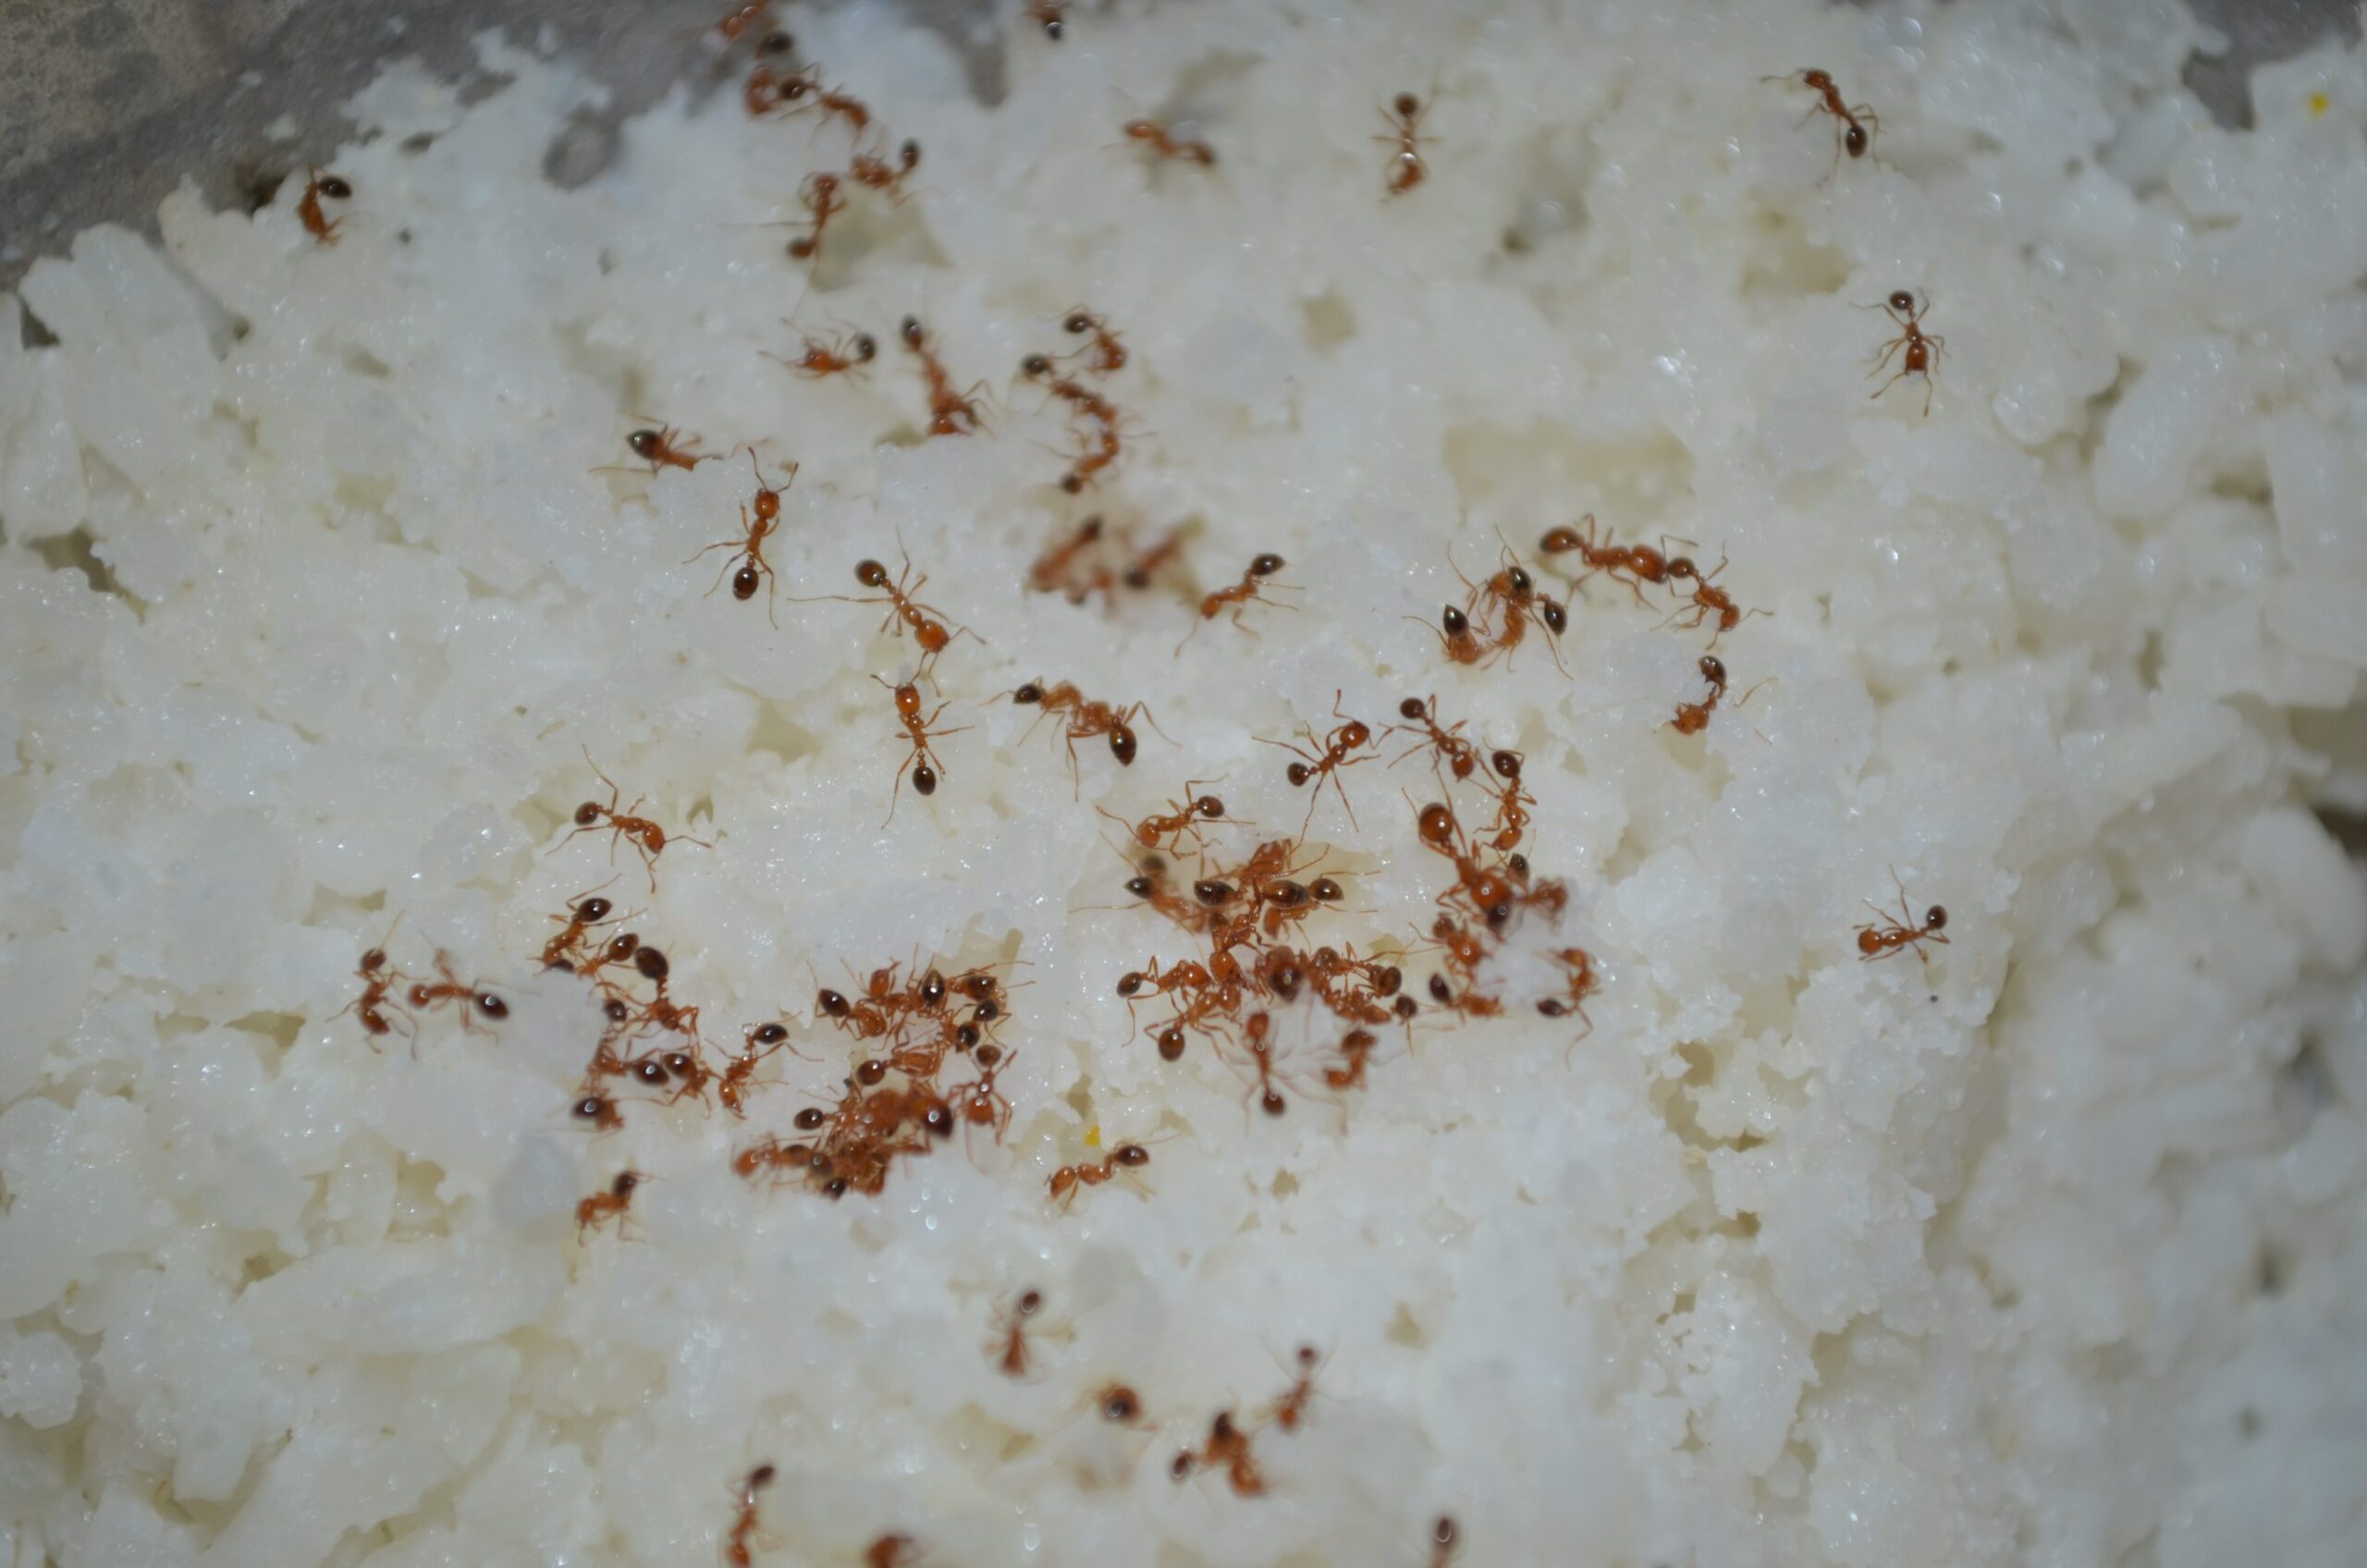 Fire ants on rice